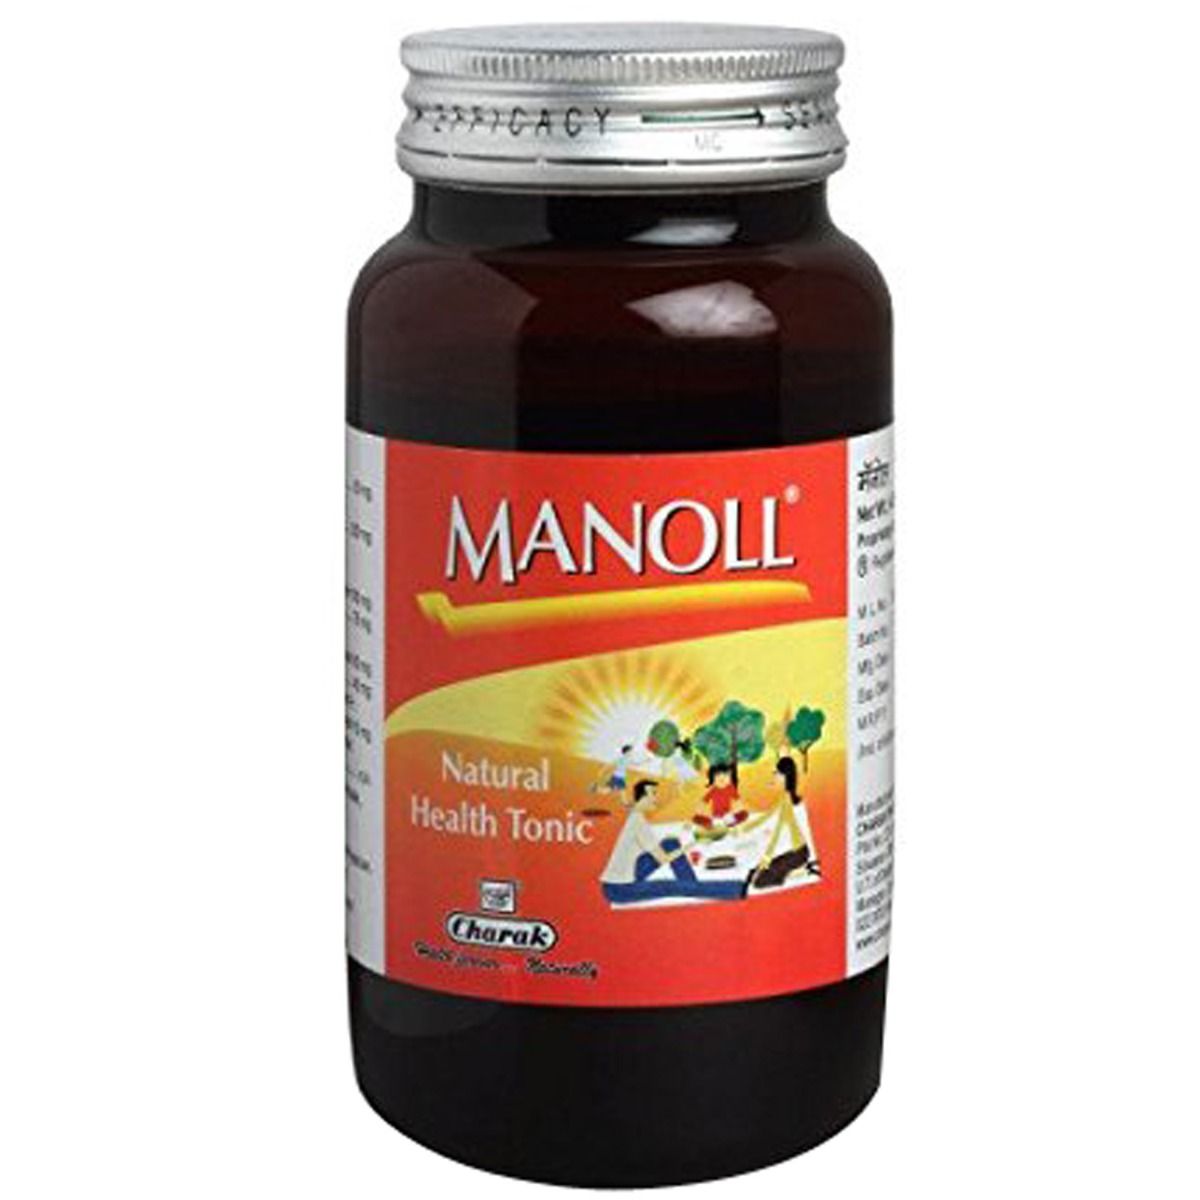 Buy Charak Manoll Syrup, 450 gm Online